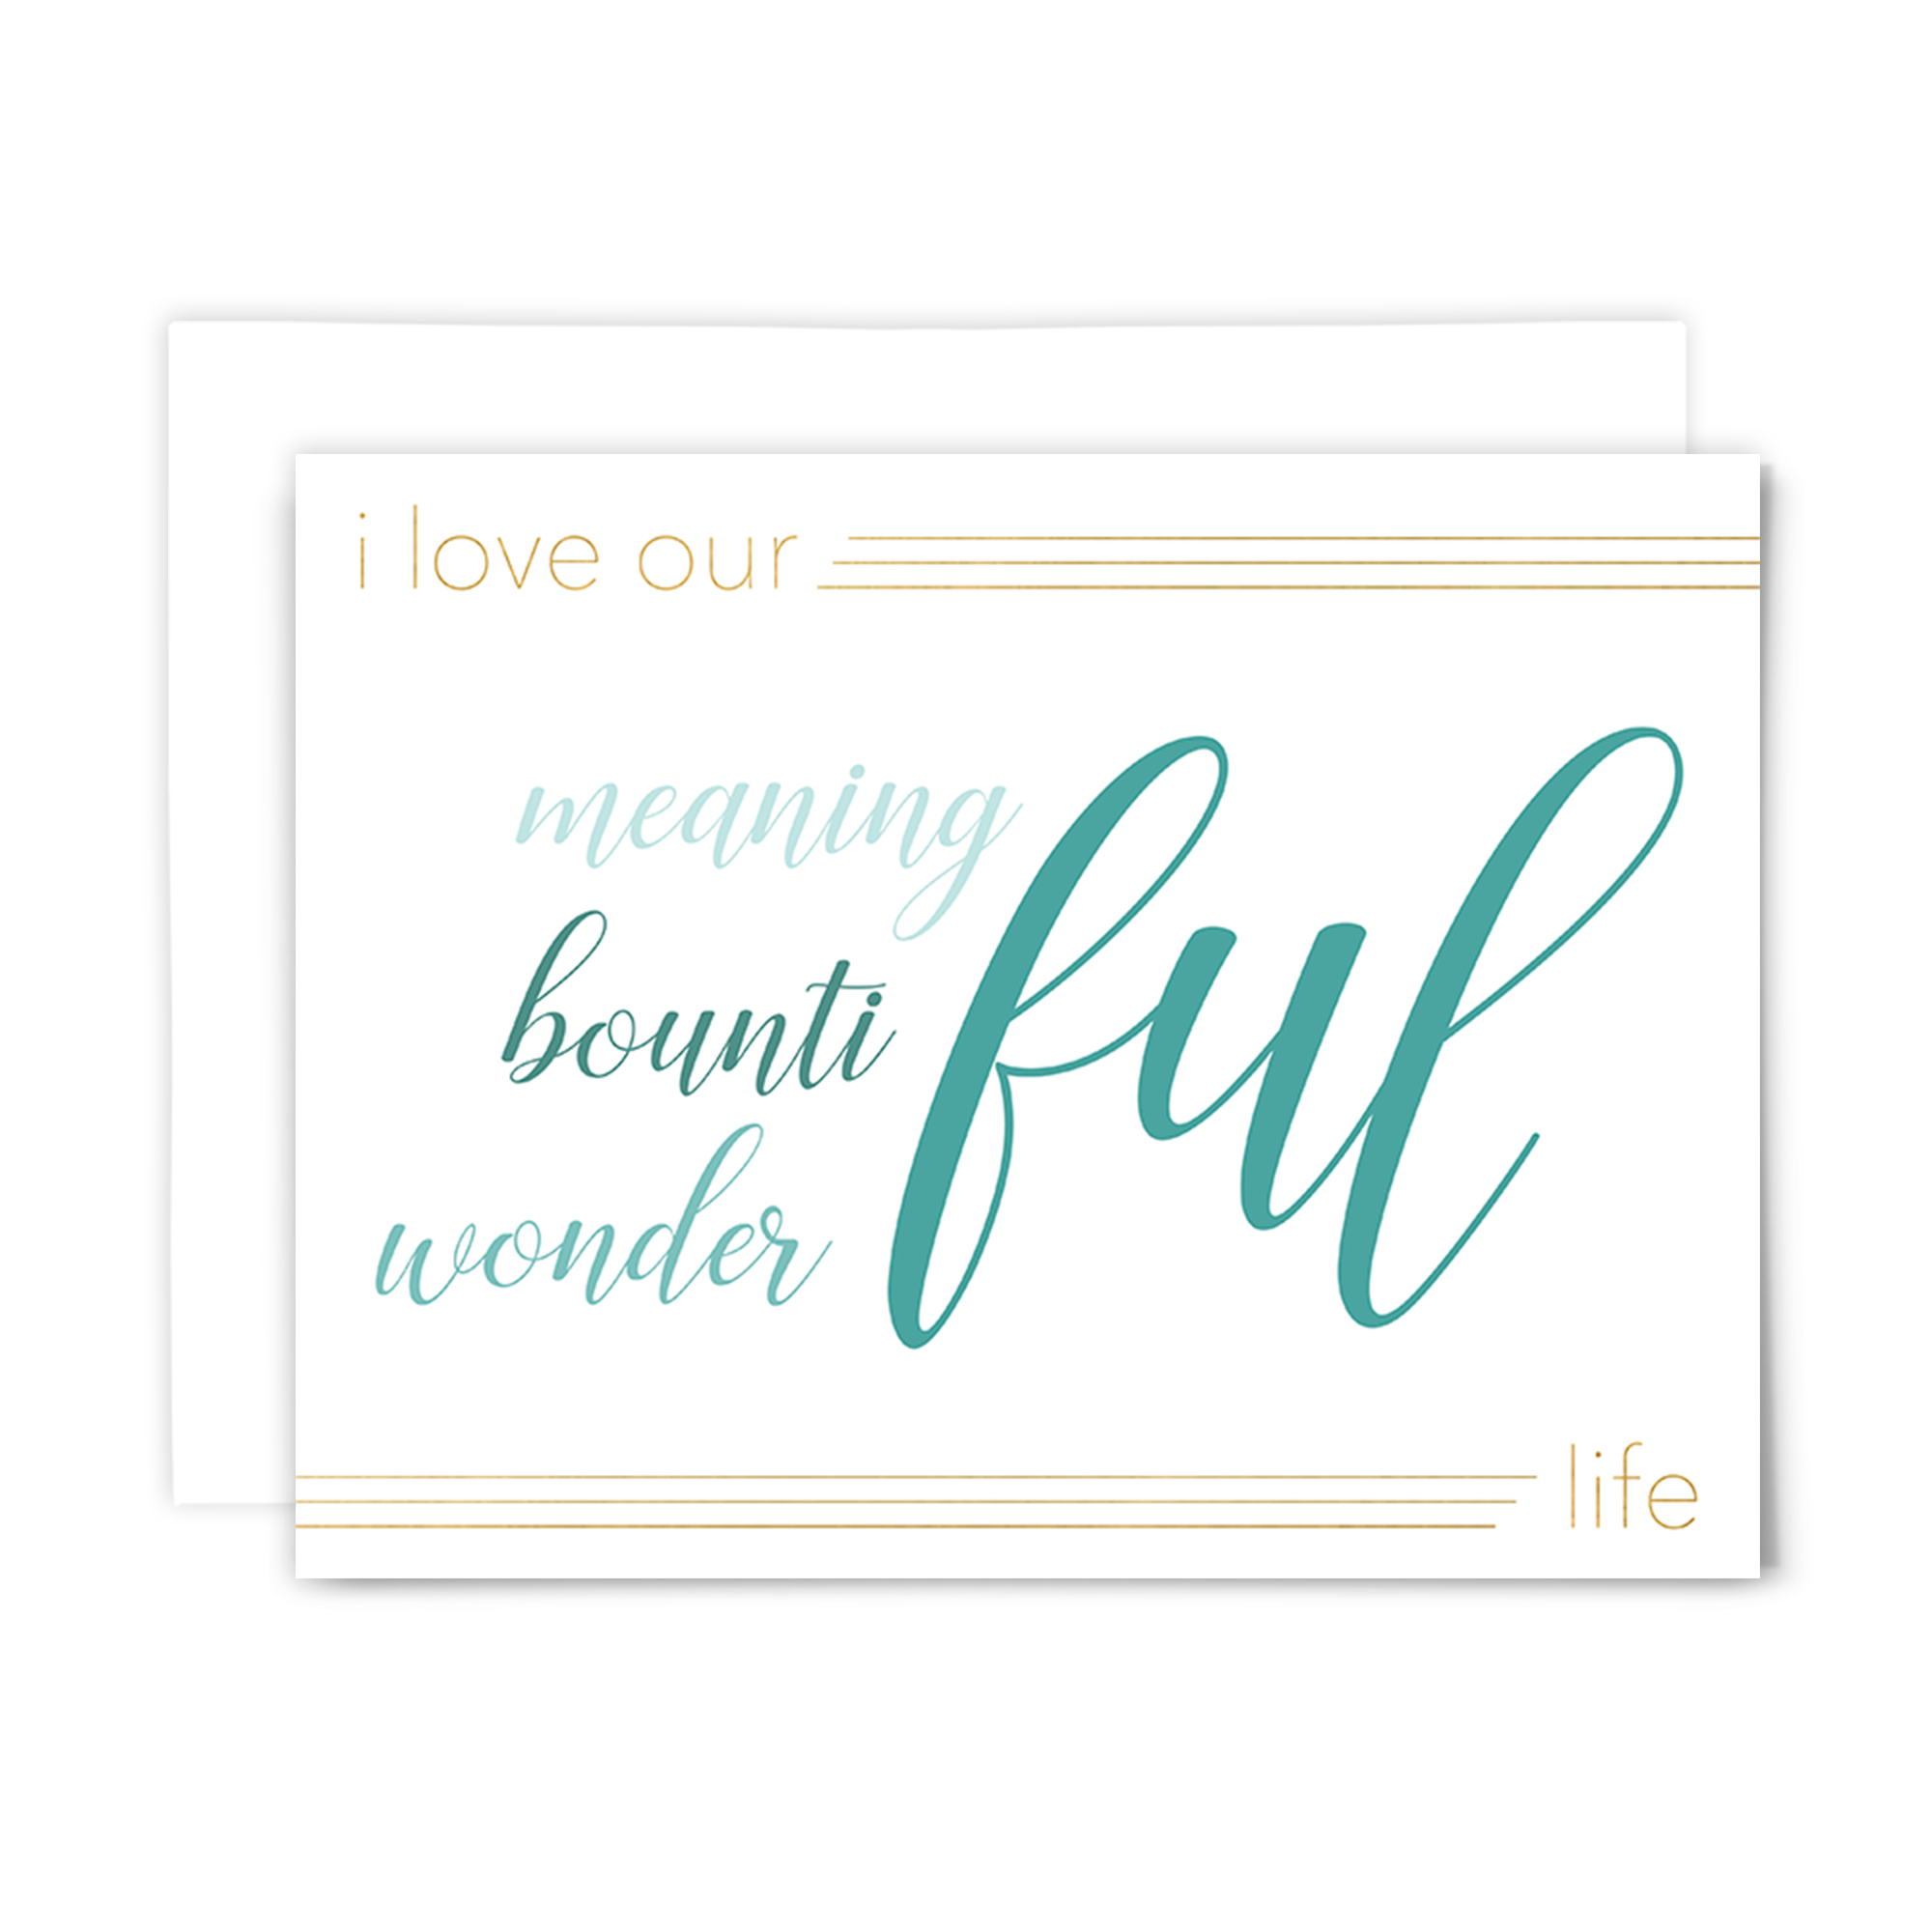 I love our meaningful-bountiful-wonderful life blank greeting card; teal and gold lettering on white background with gold design flourishes; with white envelope